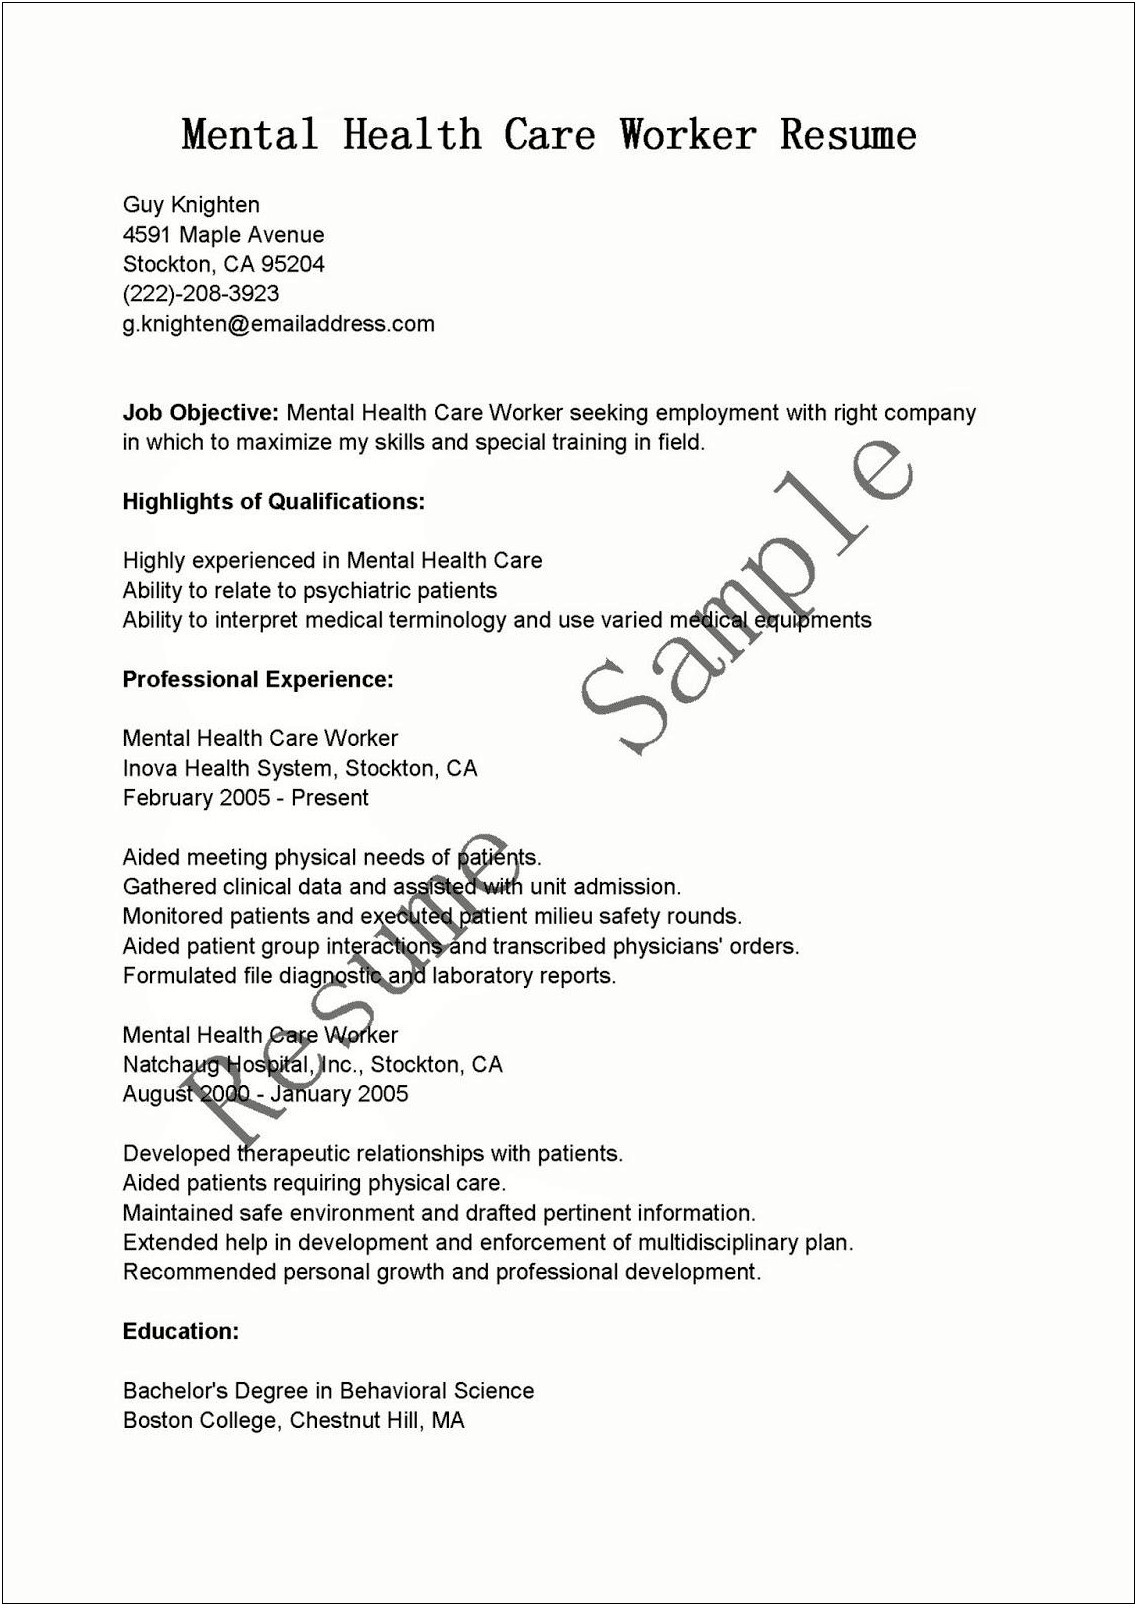 Resume Career Objective For Healthcare